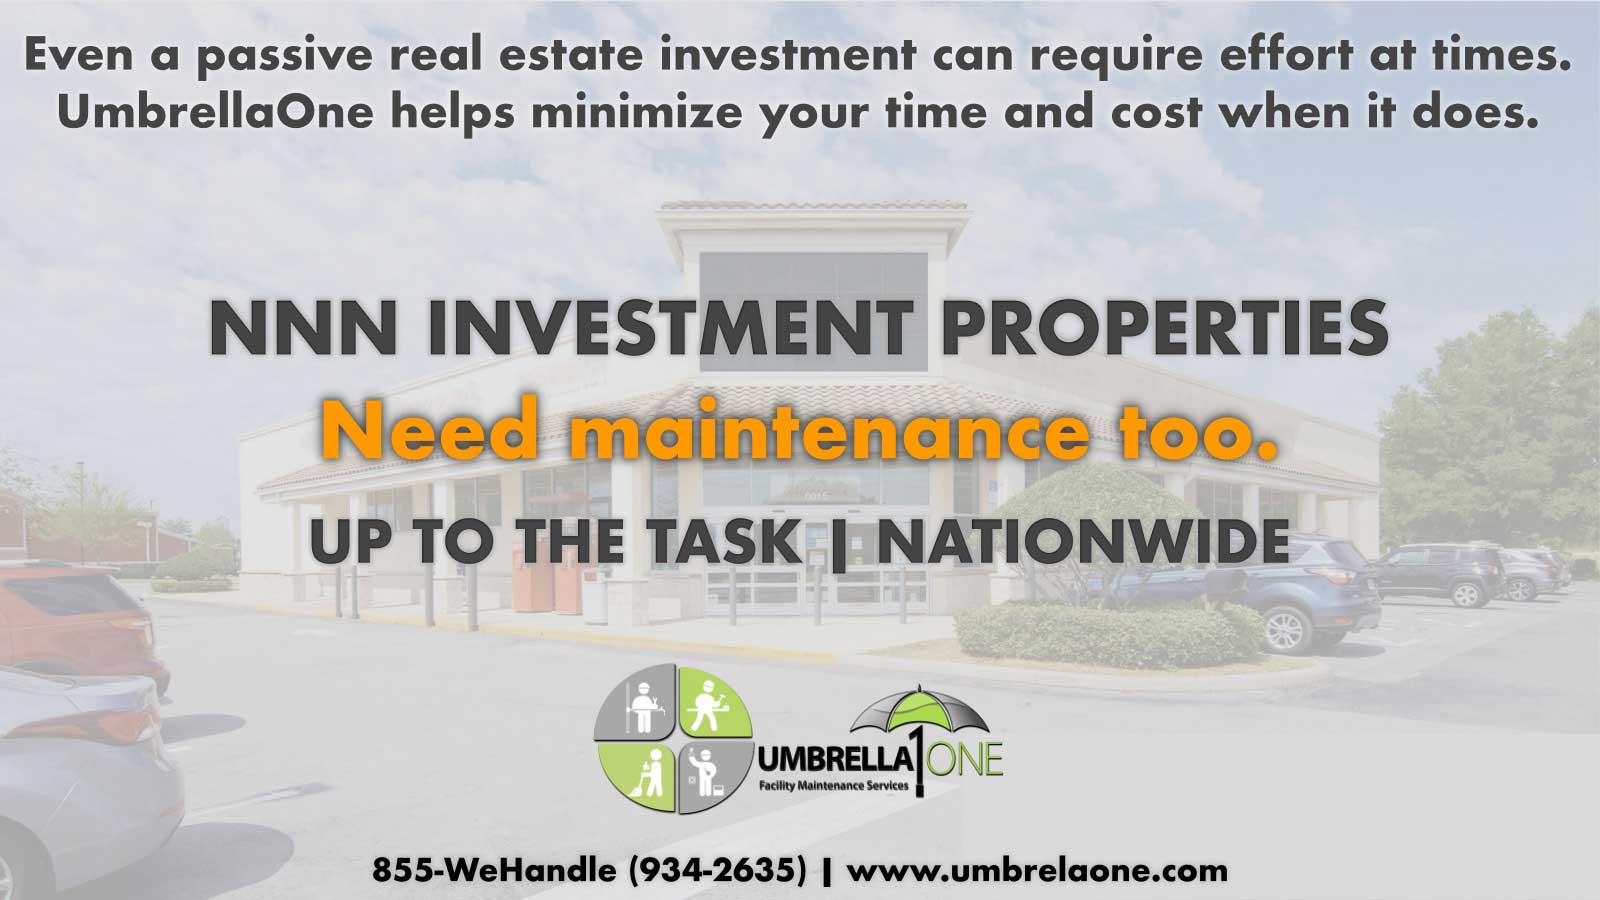 Caption: nnn investment properties need maintenance, too. up to the task